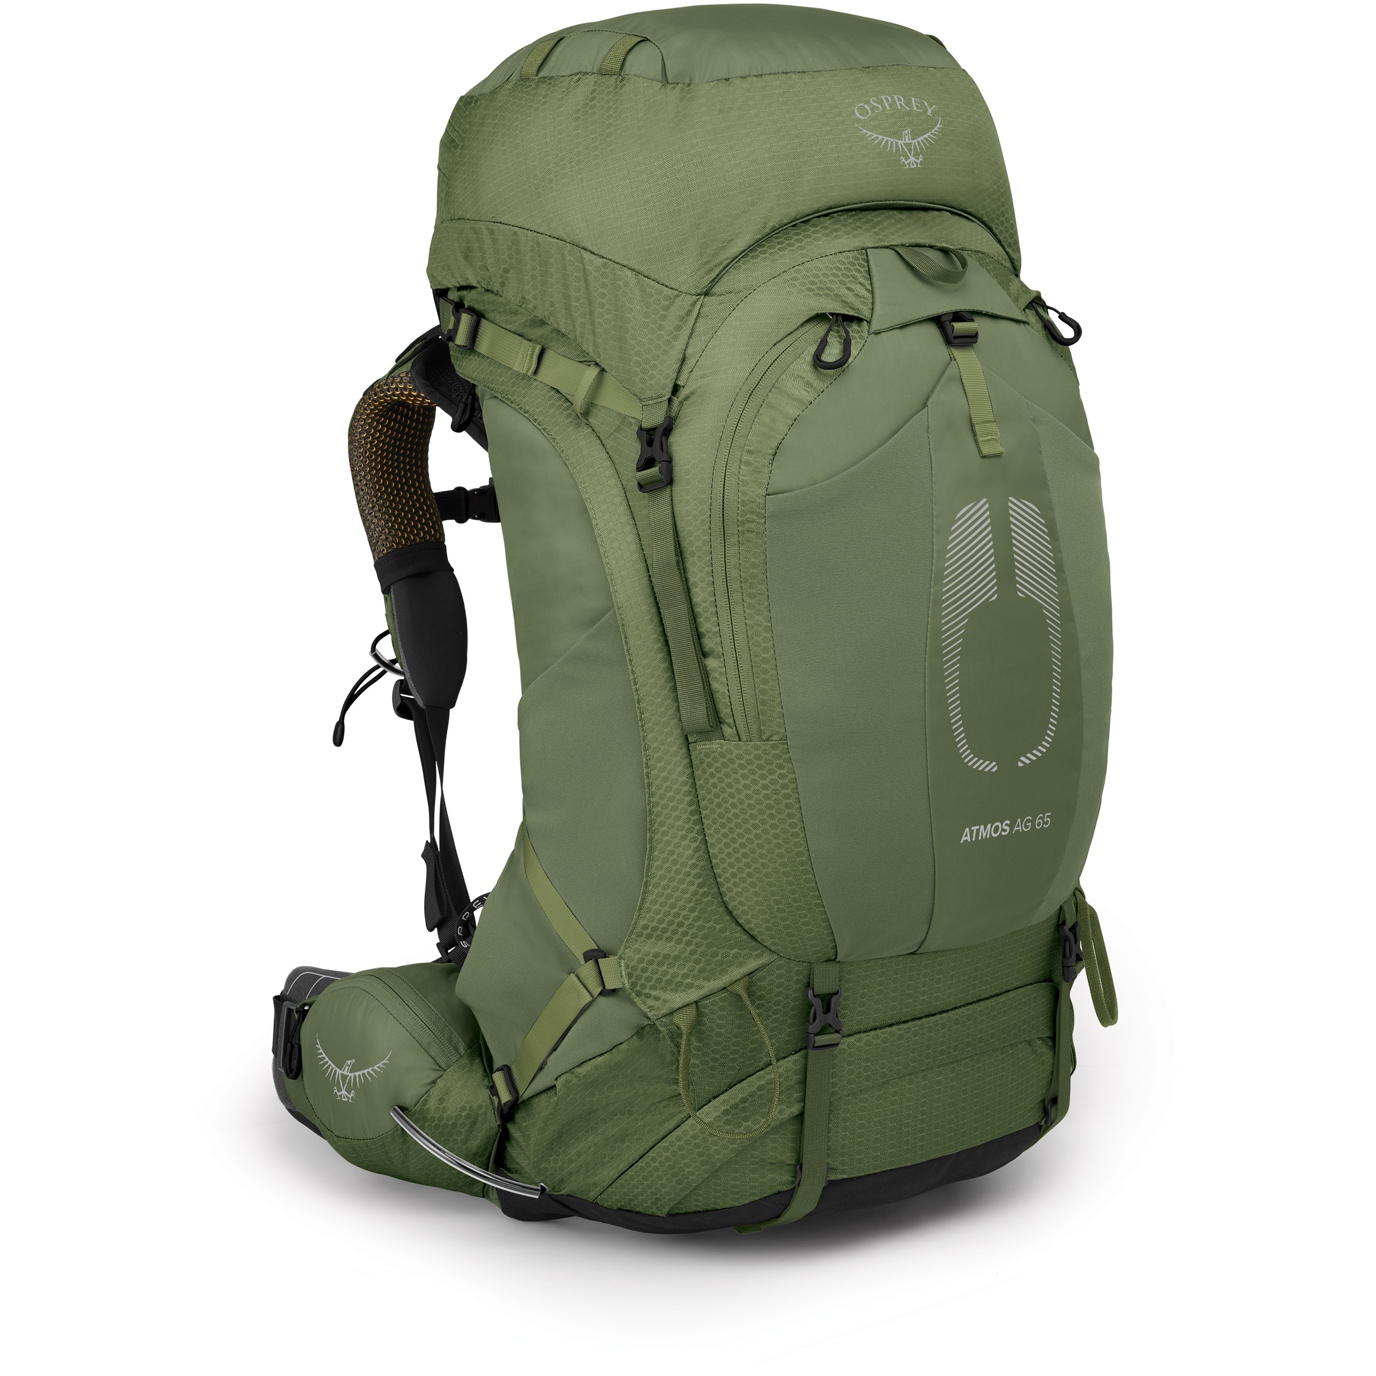 Productfoto van Osprey Atmos AG 65 Backpack - Mythical Green - L/XL